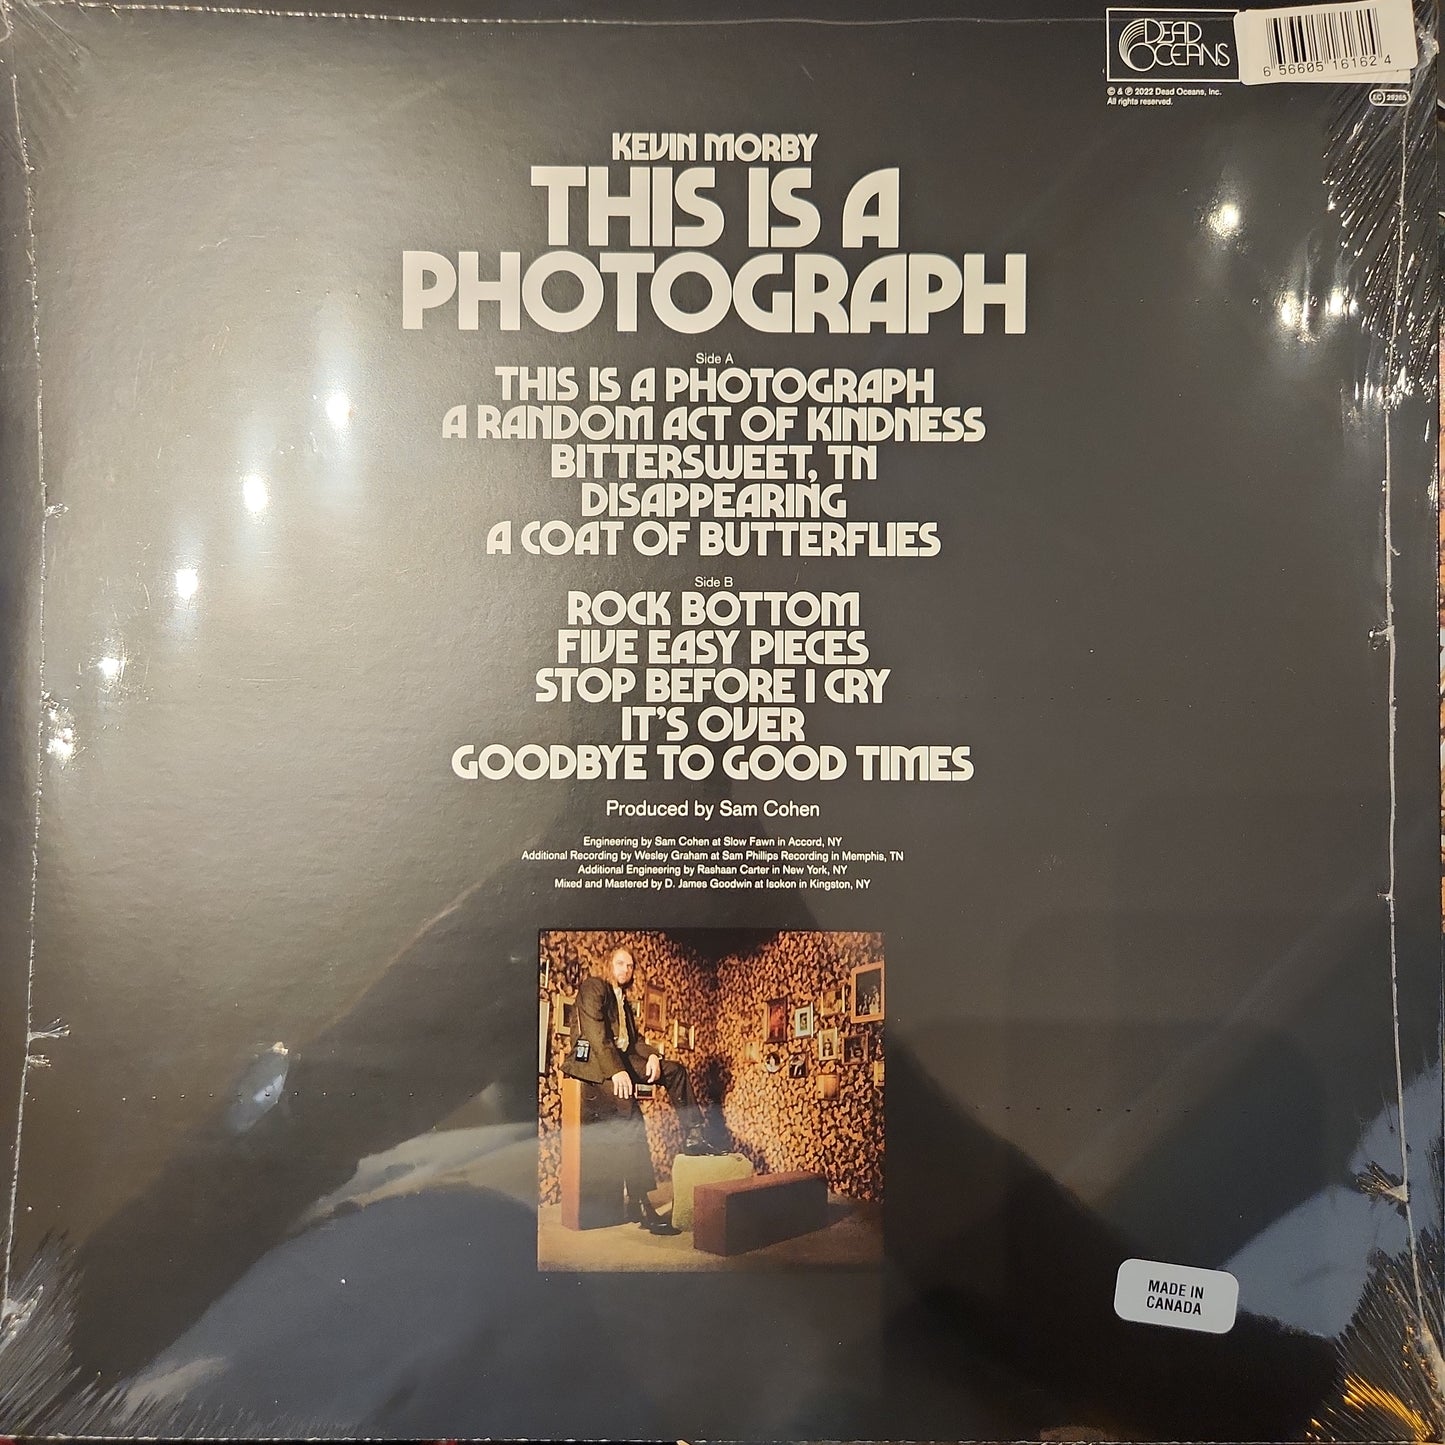 Kevin Morby - This is a Photograph - Vinyl LP